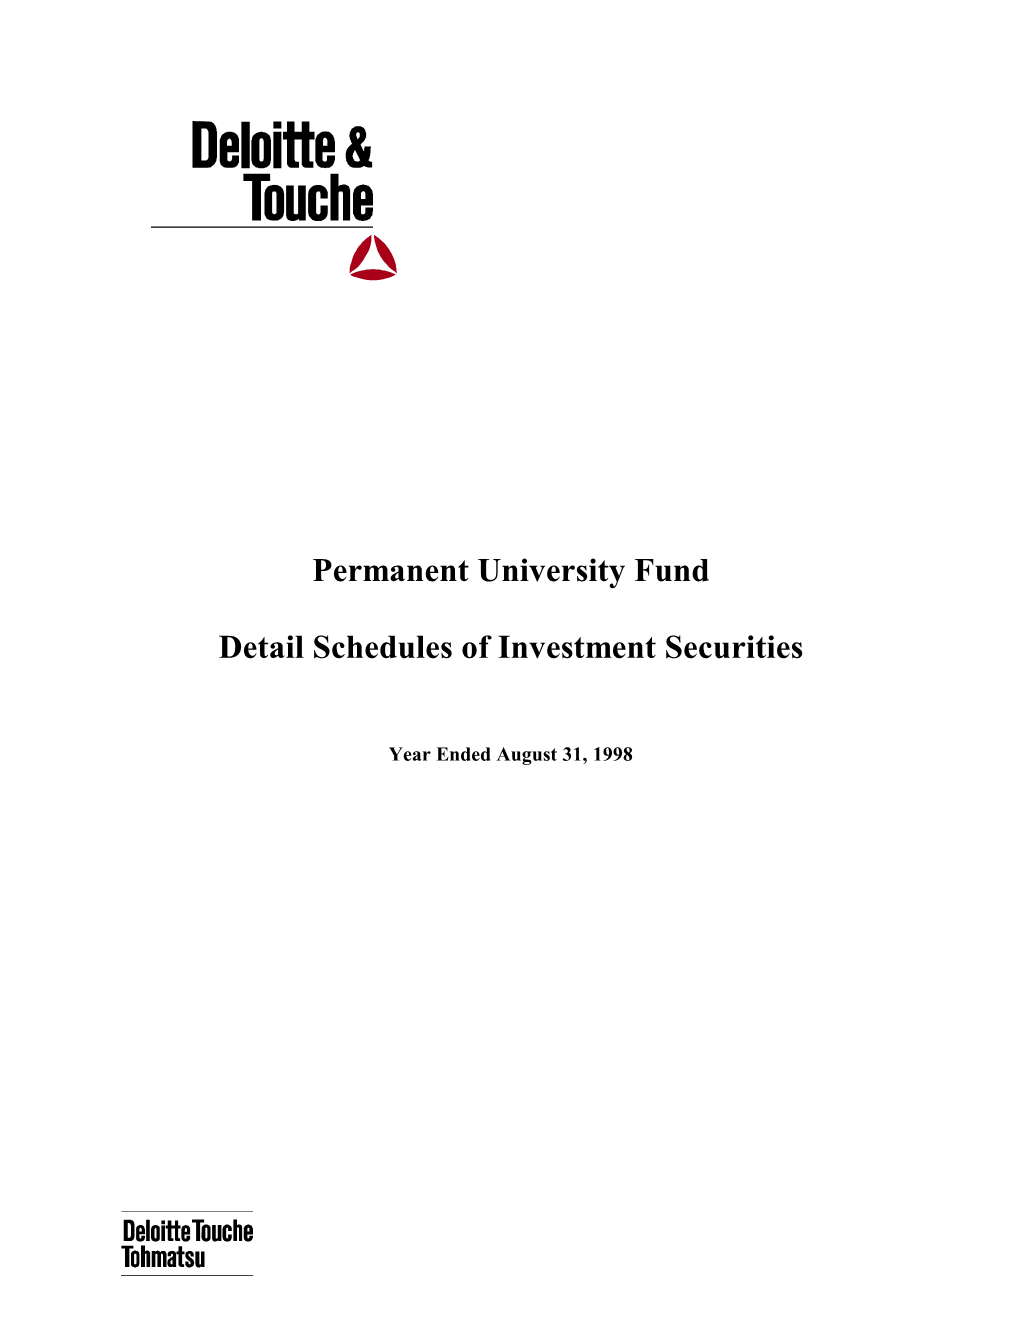 Permanent University Fund Detail Schedules of Investment Securities